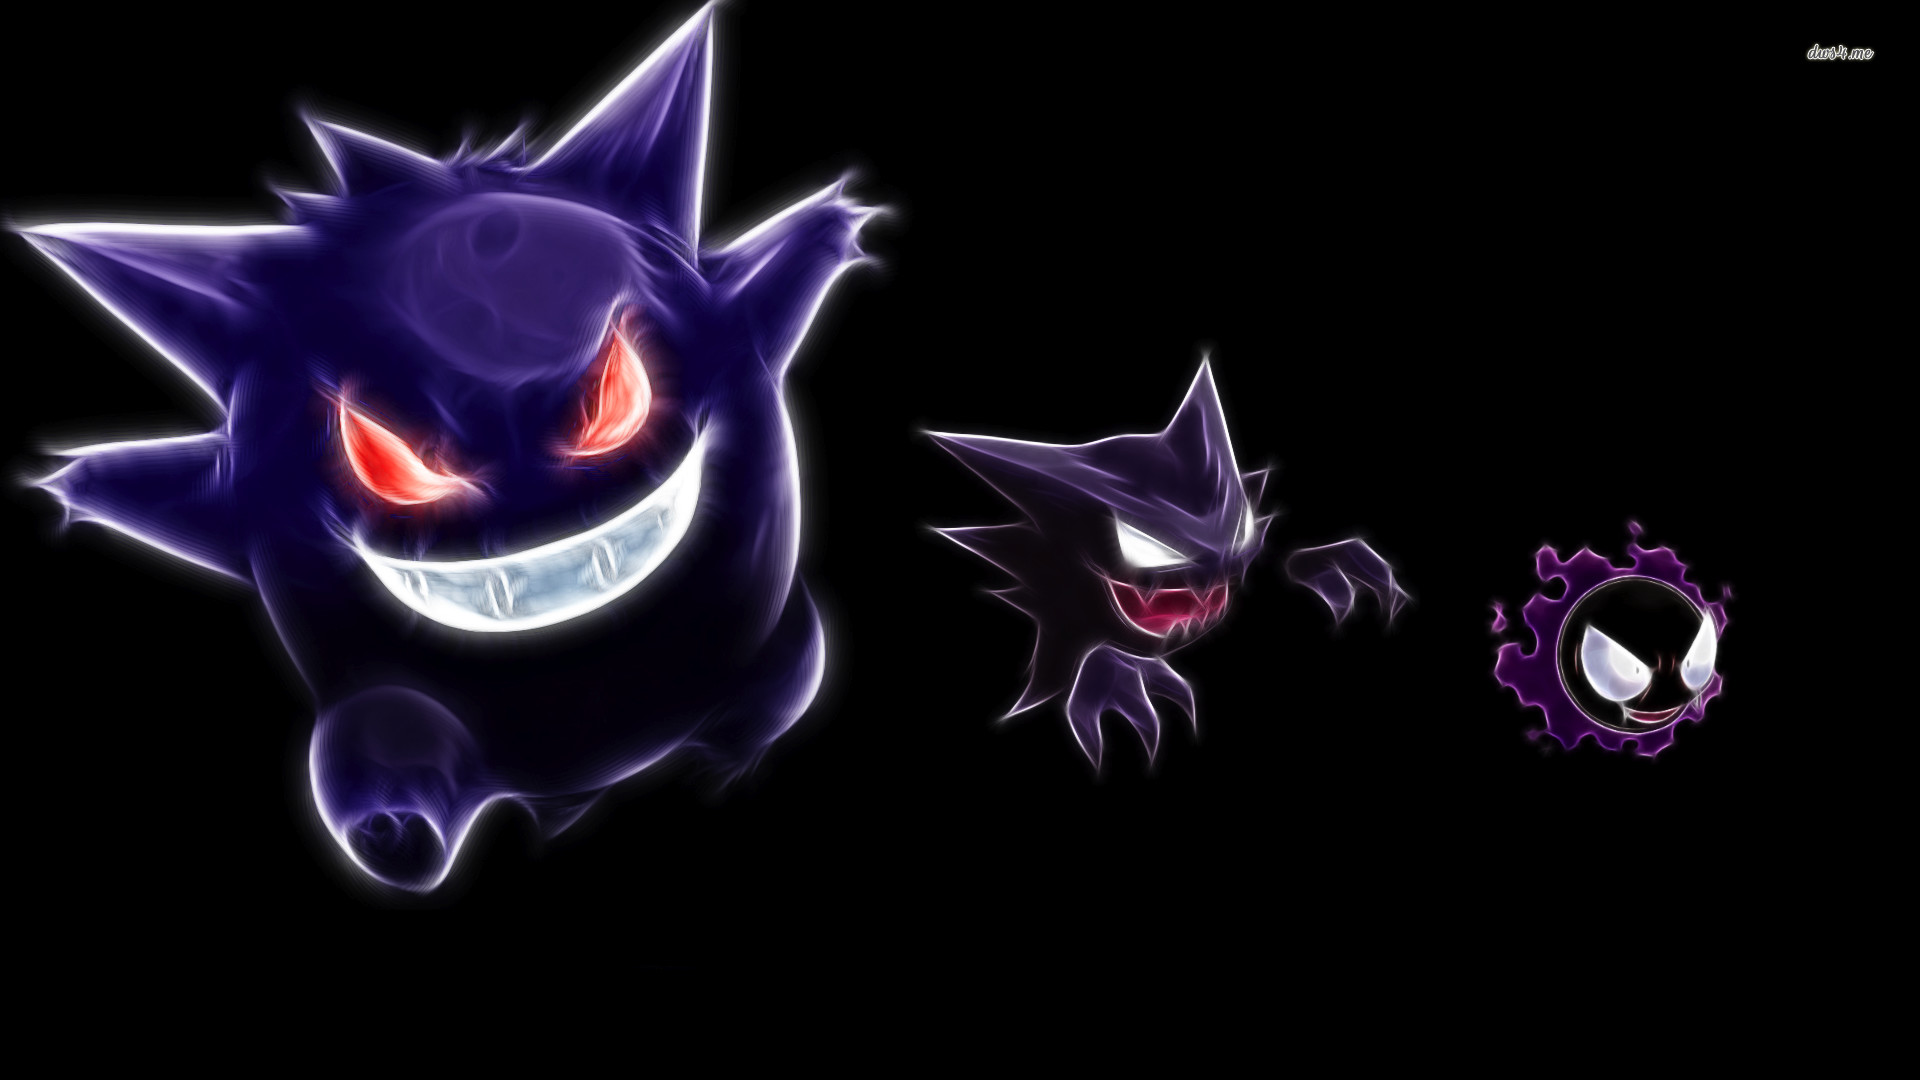 1920x1080 Gengar, Haunter and Gastly in Pokemon wallpaper - Game wallpapers .